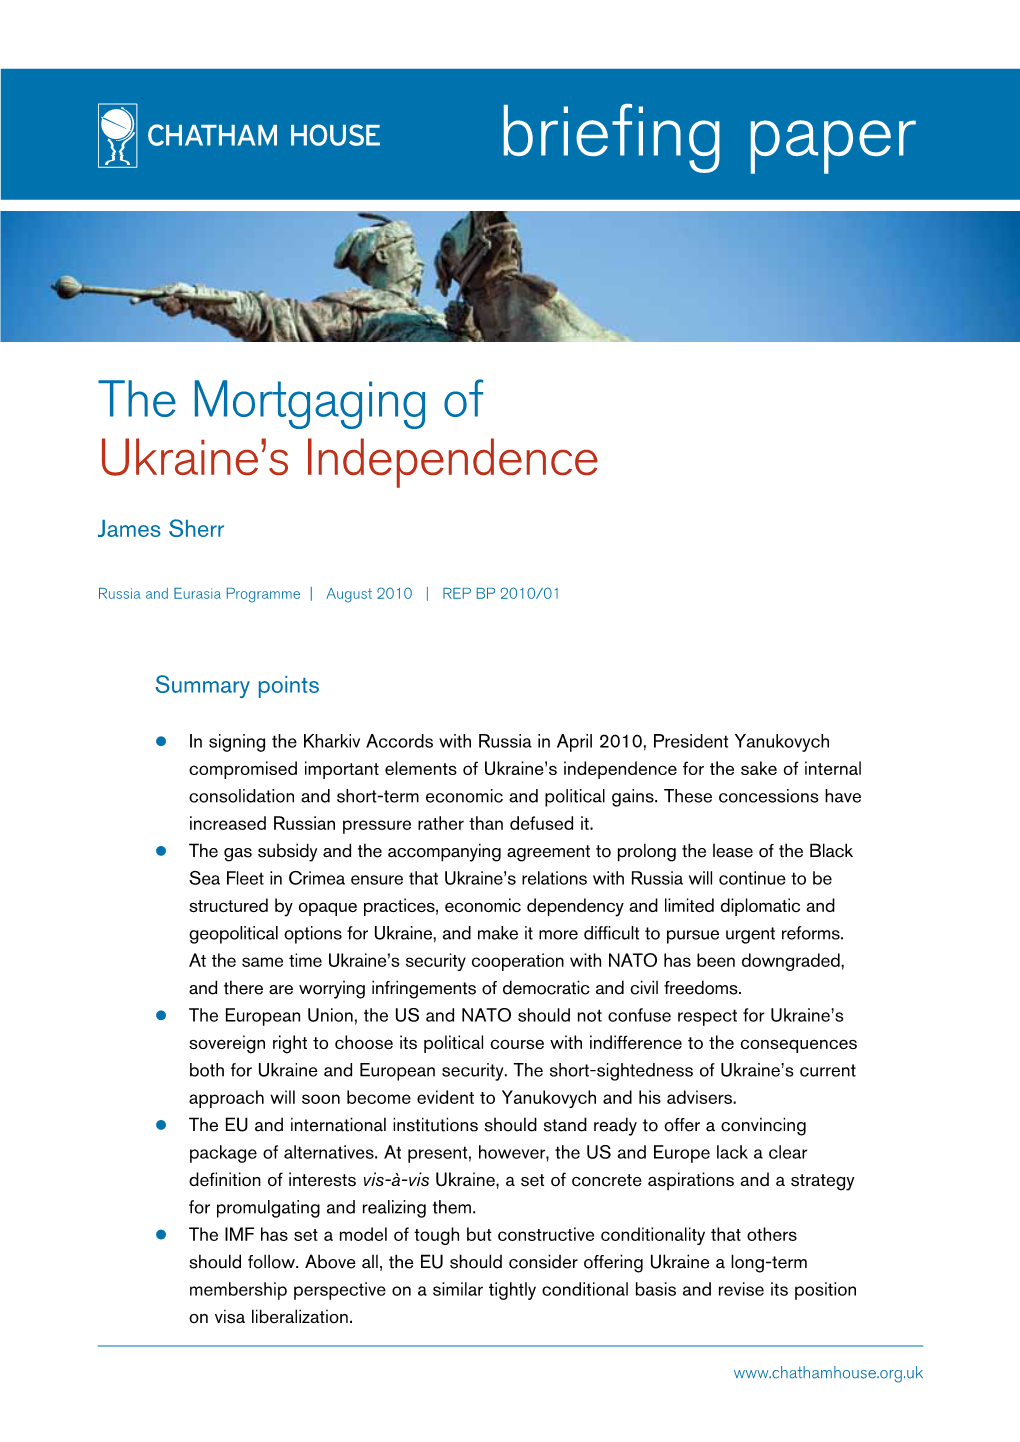 The Mortgaging of Ukraine's Independence